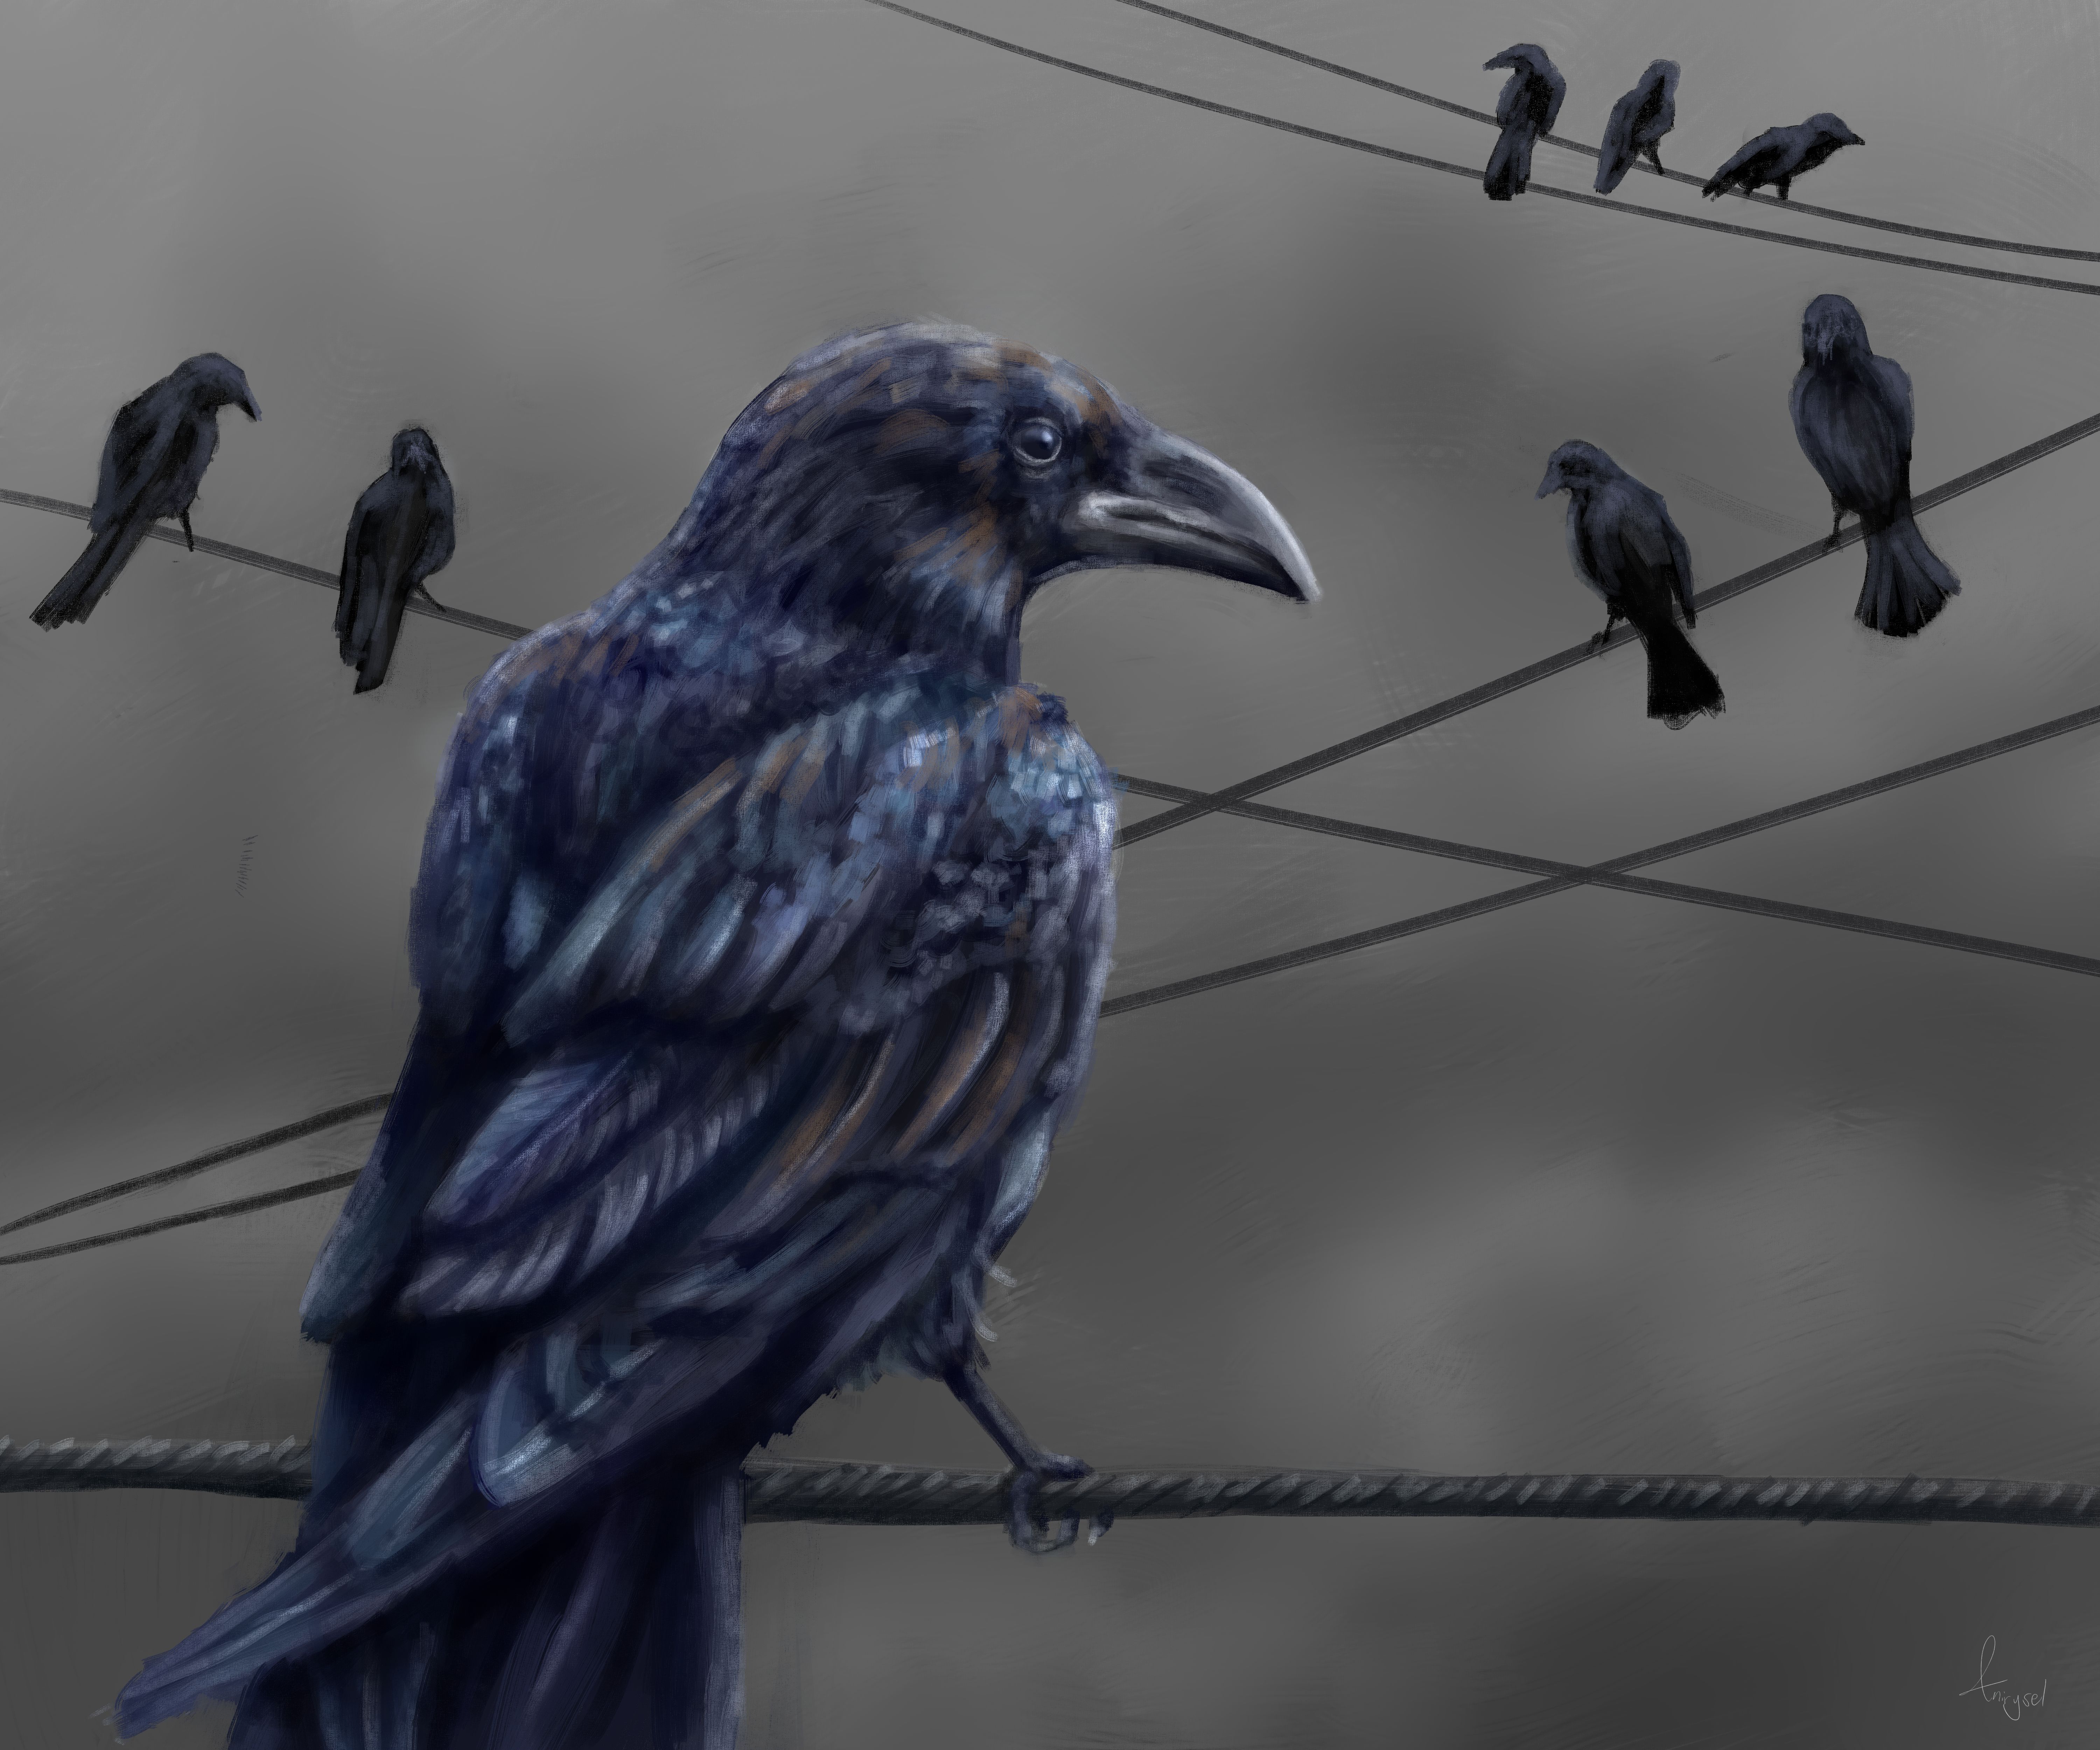 feather, wire, raven, bird, art wallpaper for mobile